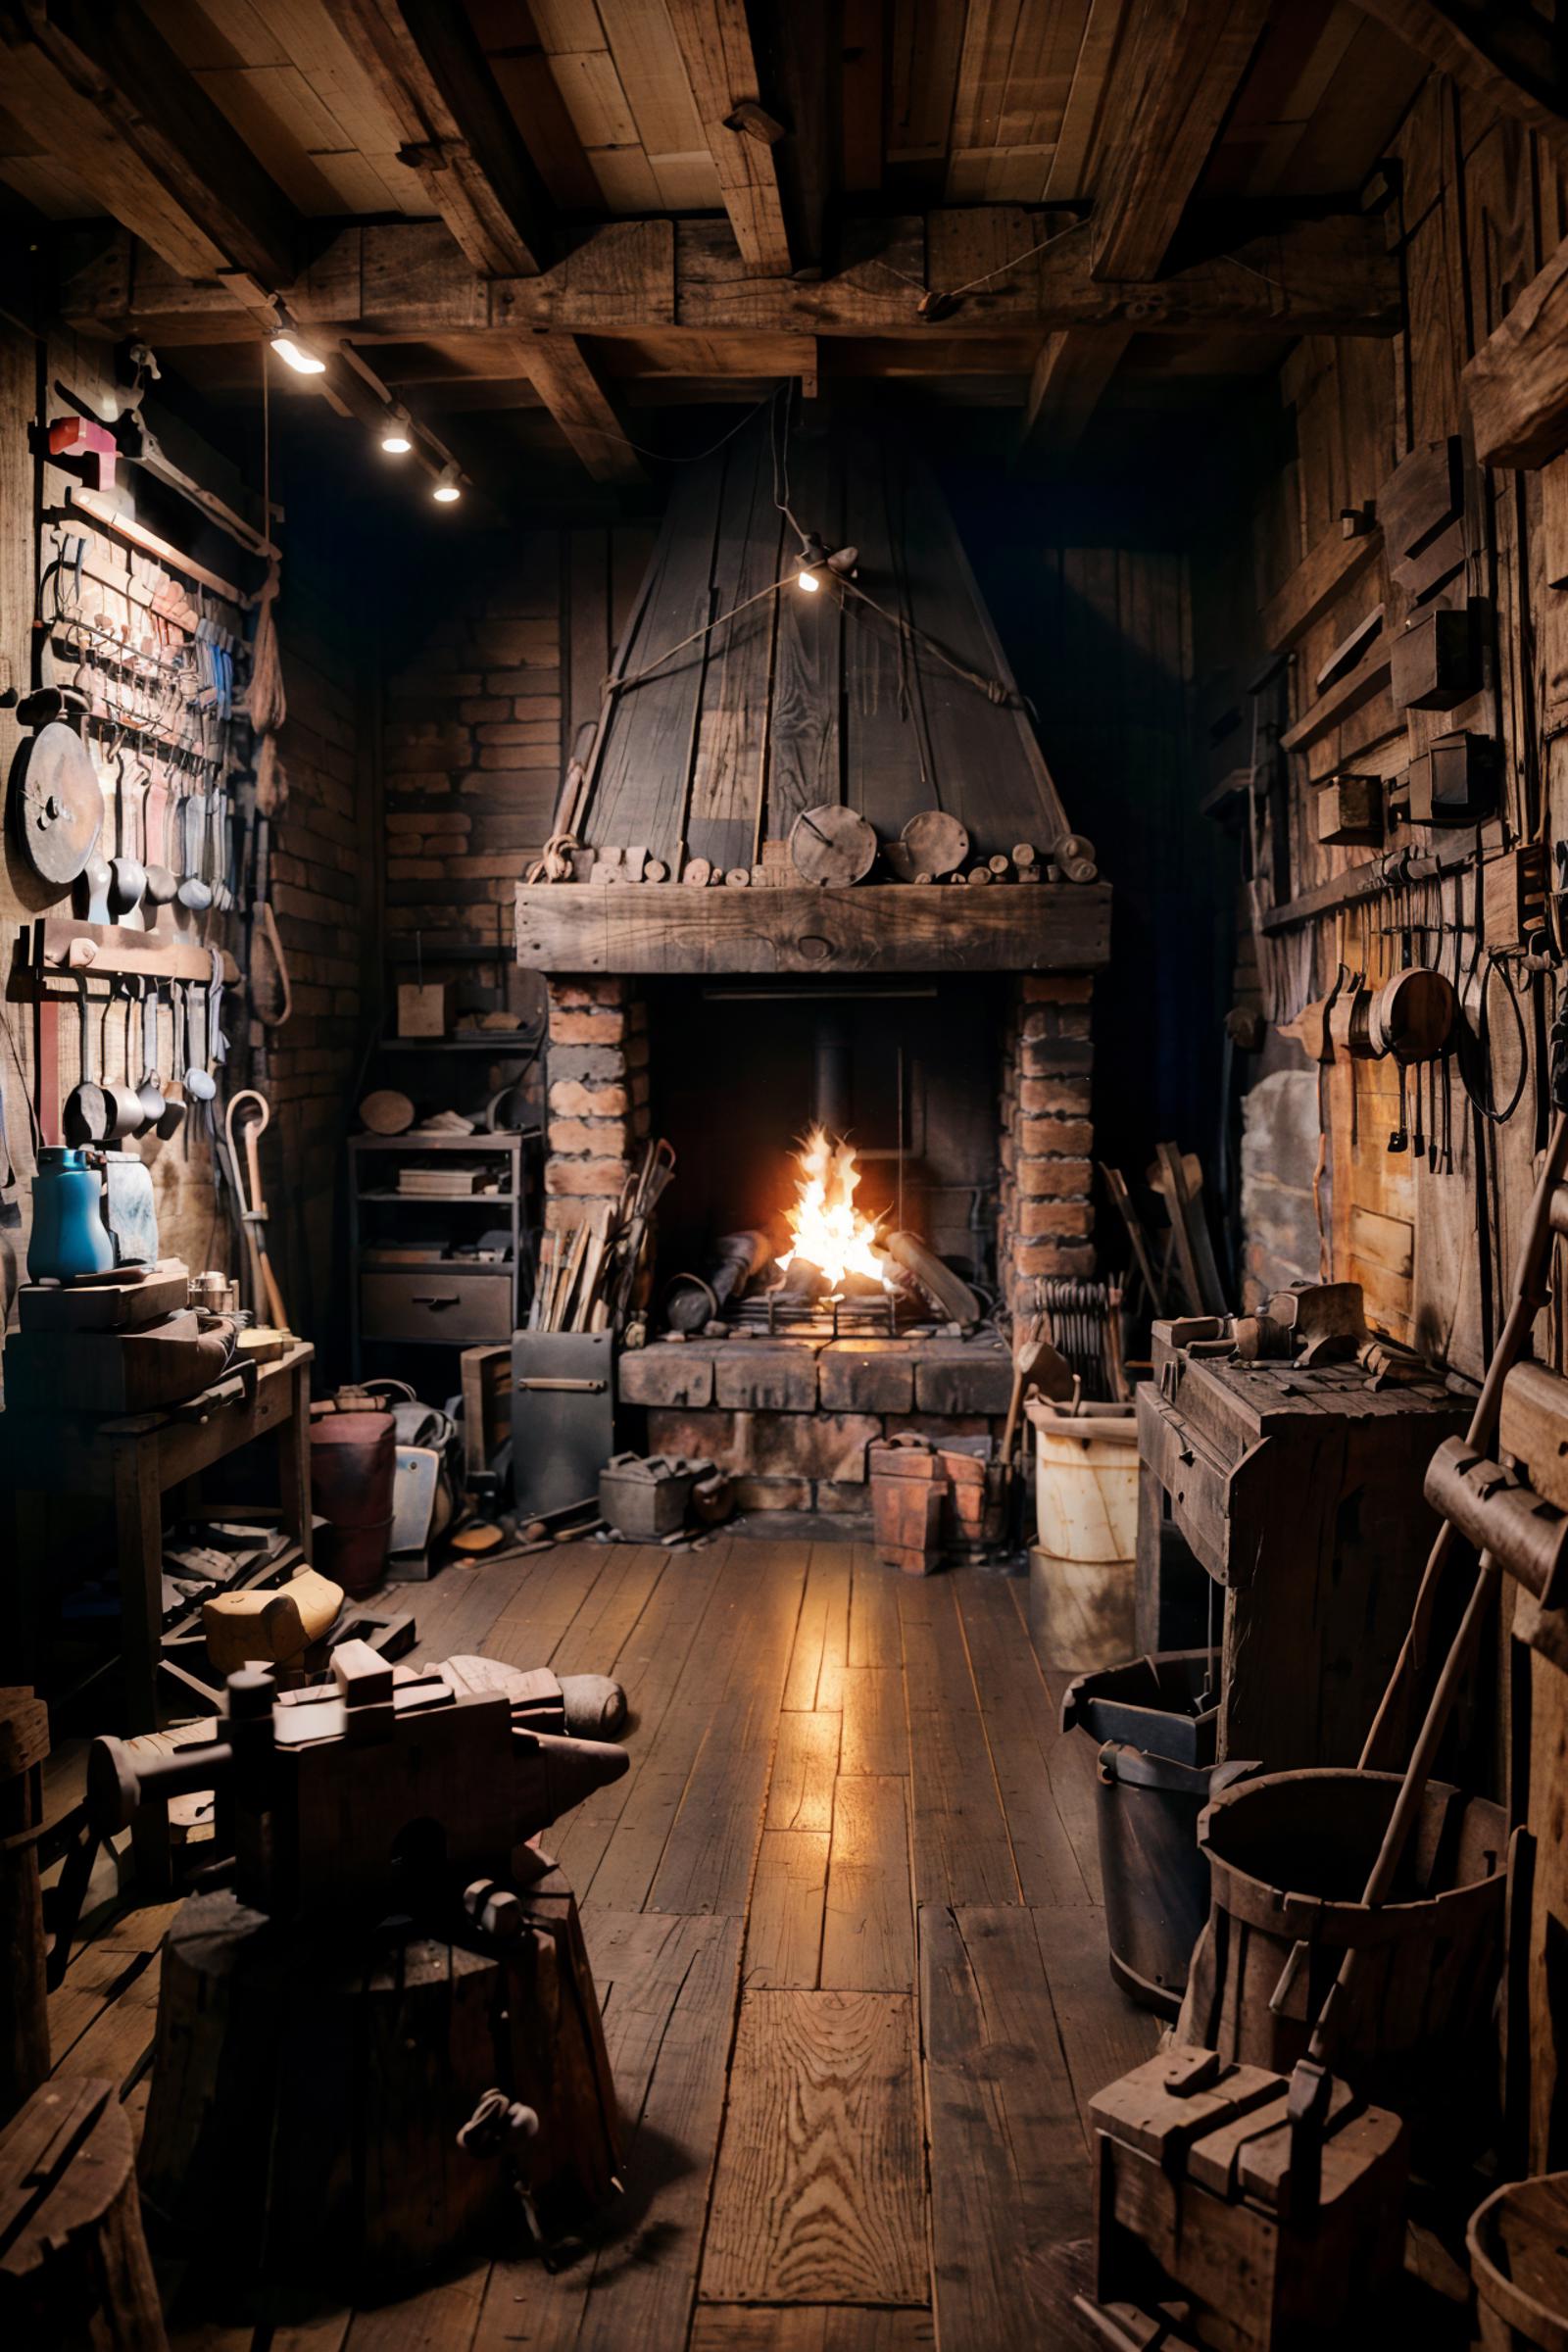 A cozy fireplace in a workshop with tools and pots.